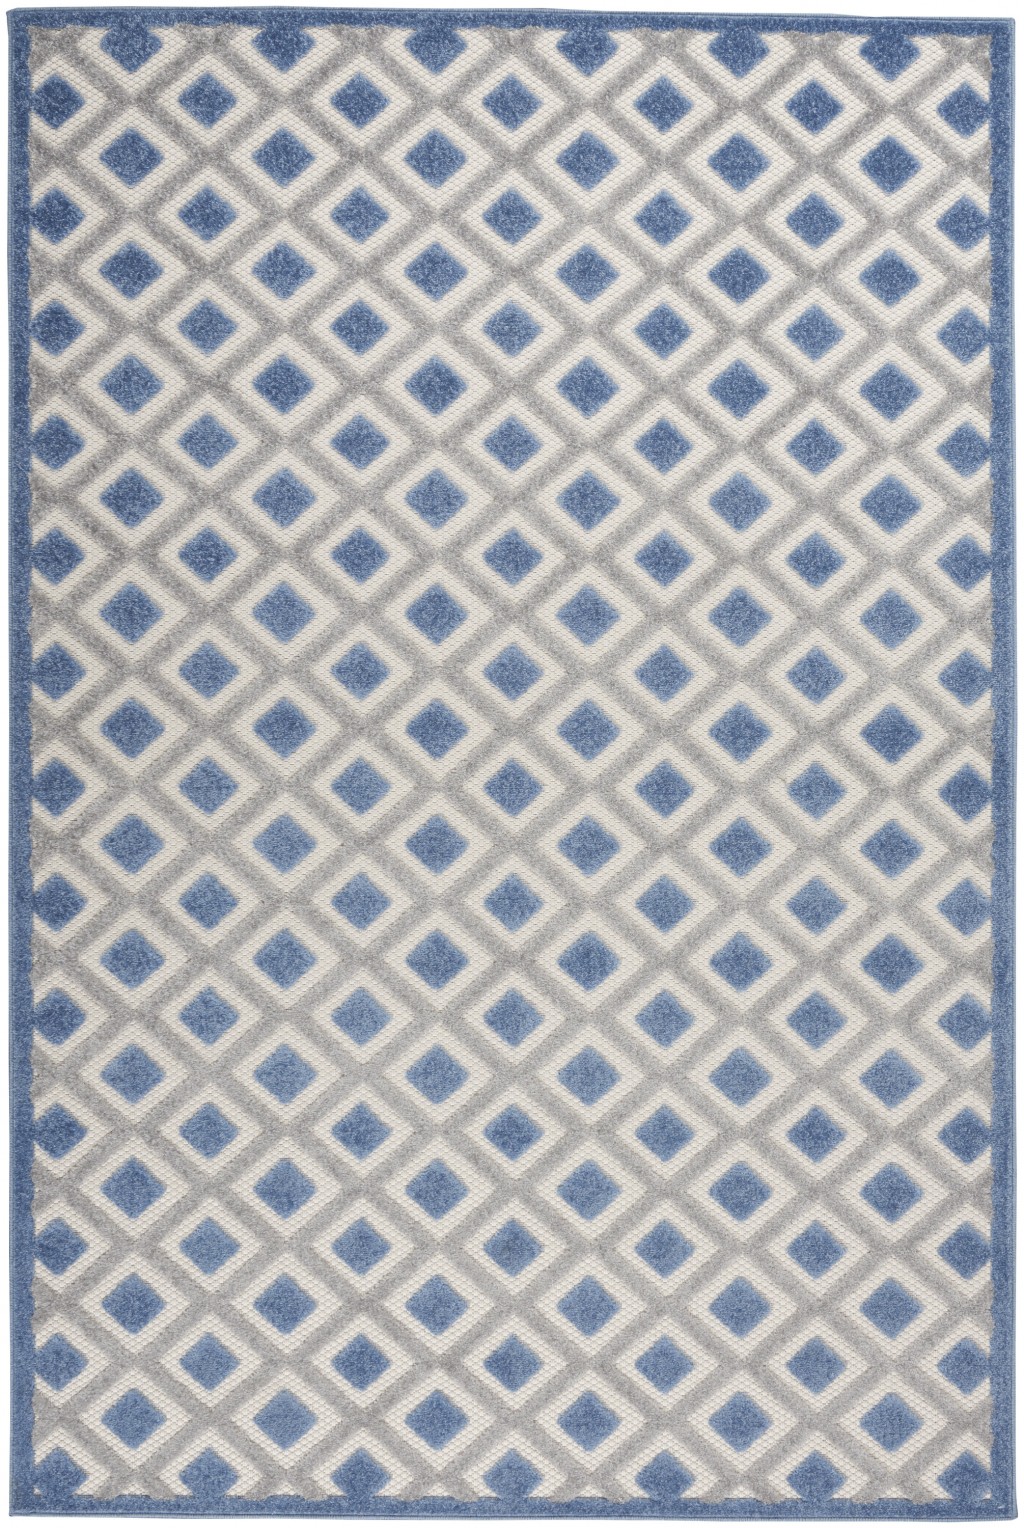 6' X 9' Blue And Gray Geometric Indoor Outdoor Area Rug-385156-1